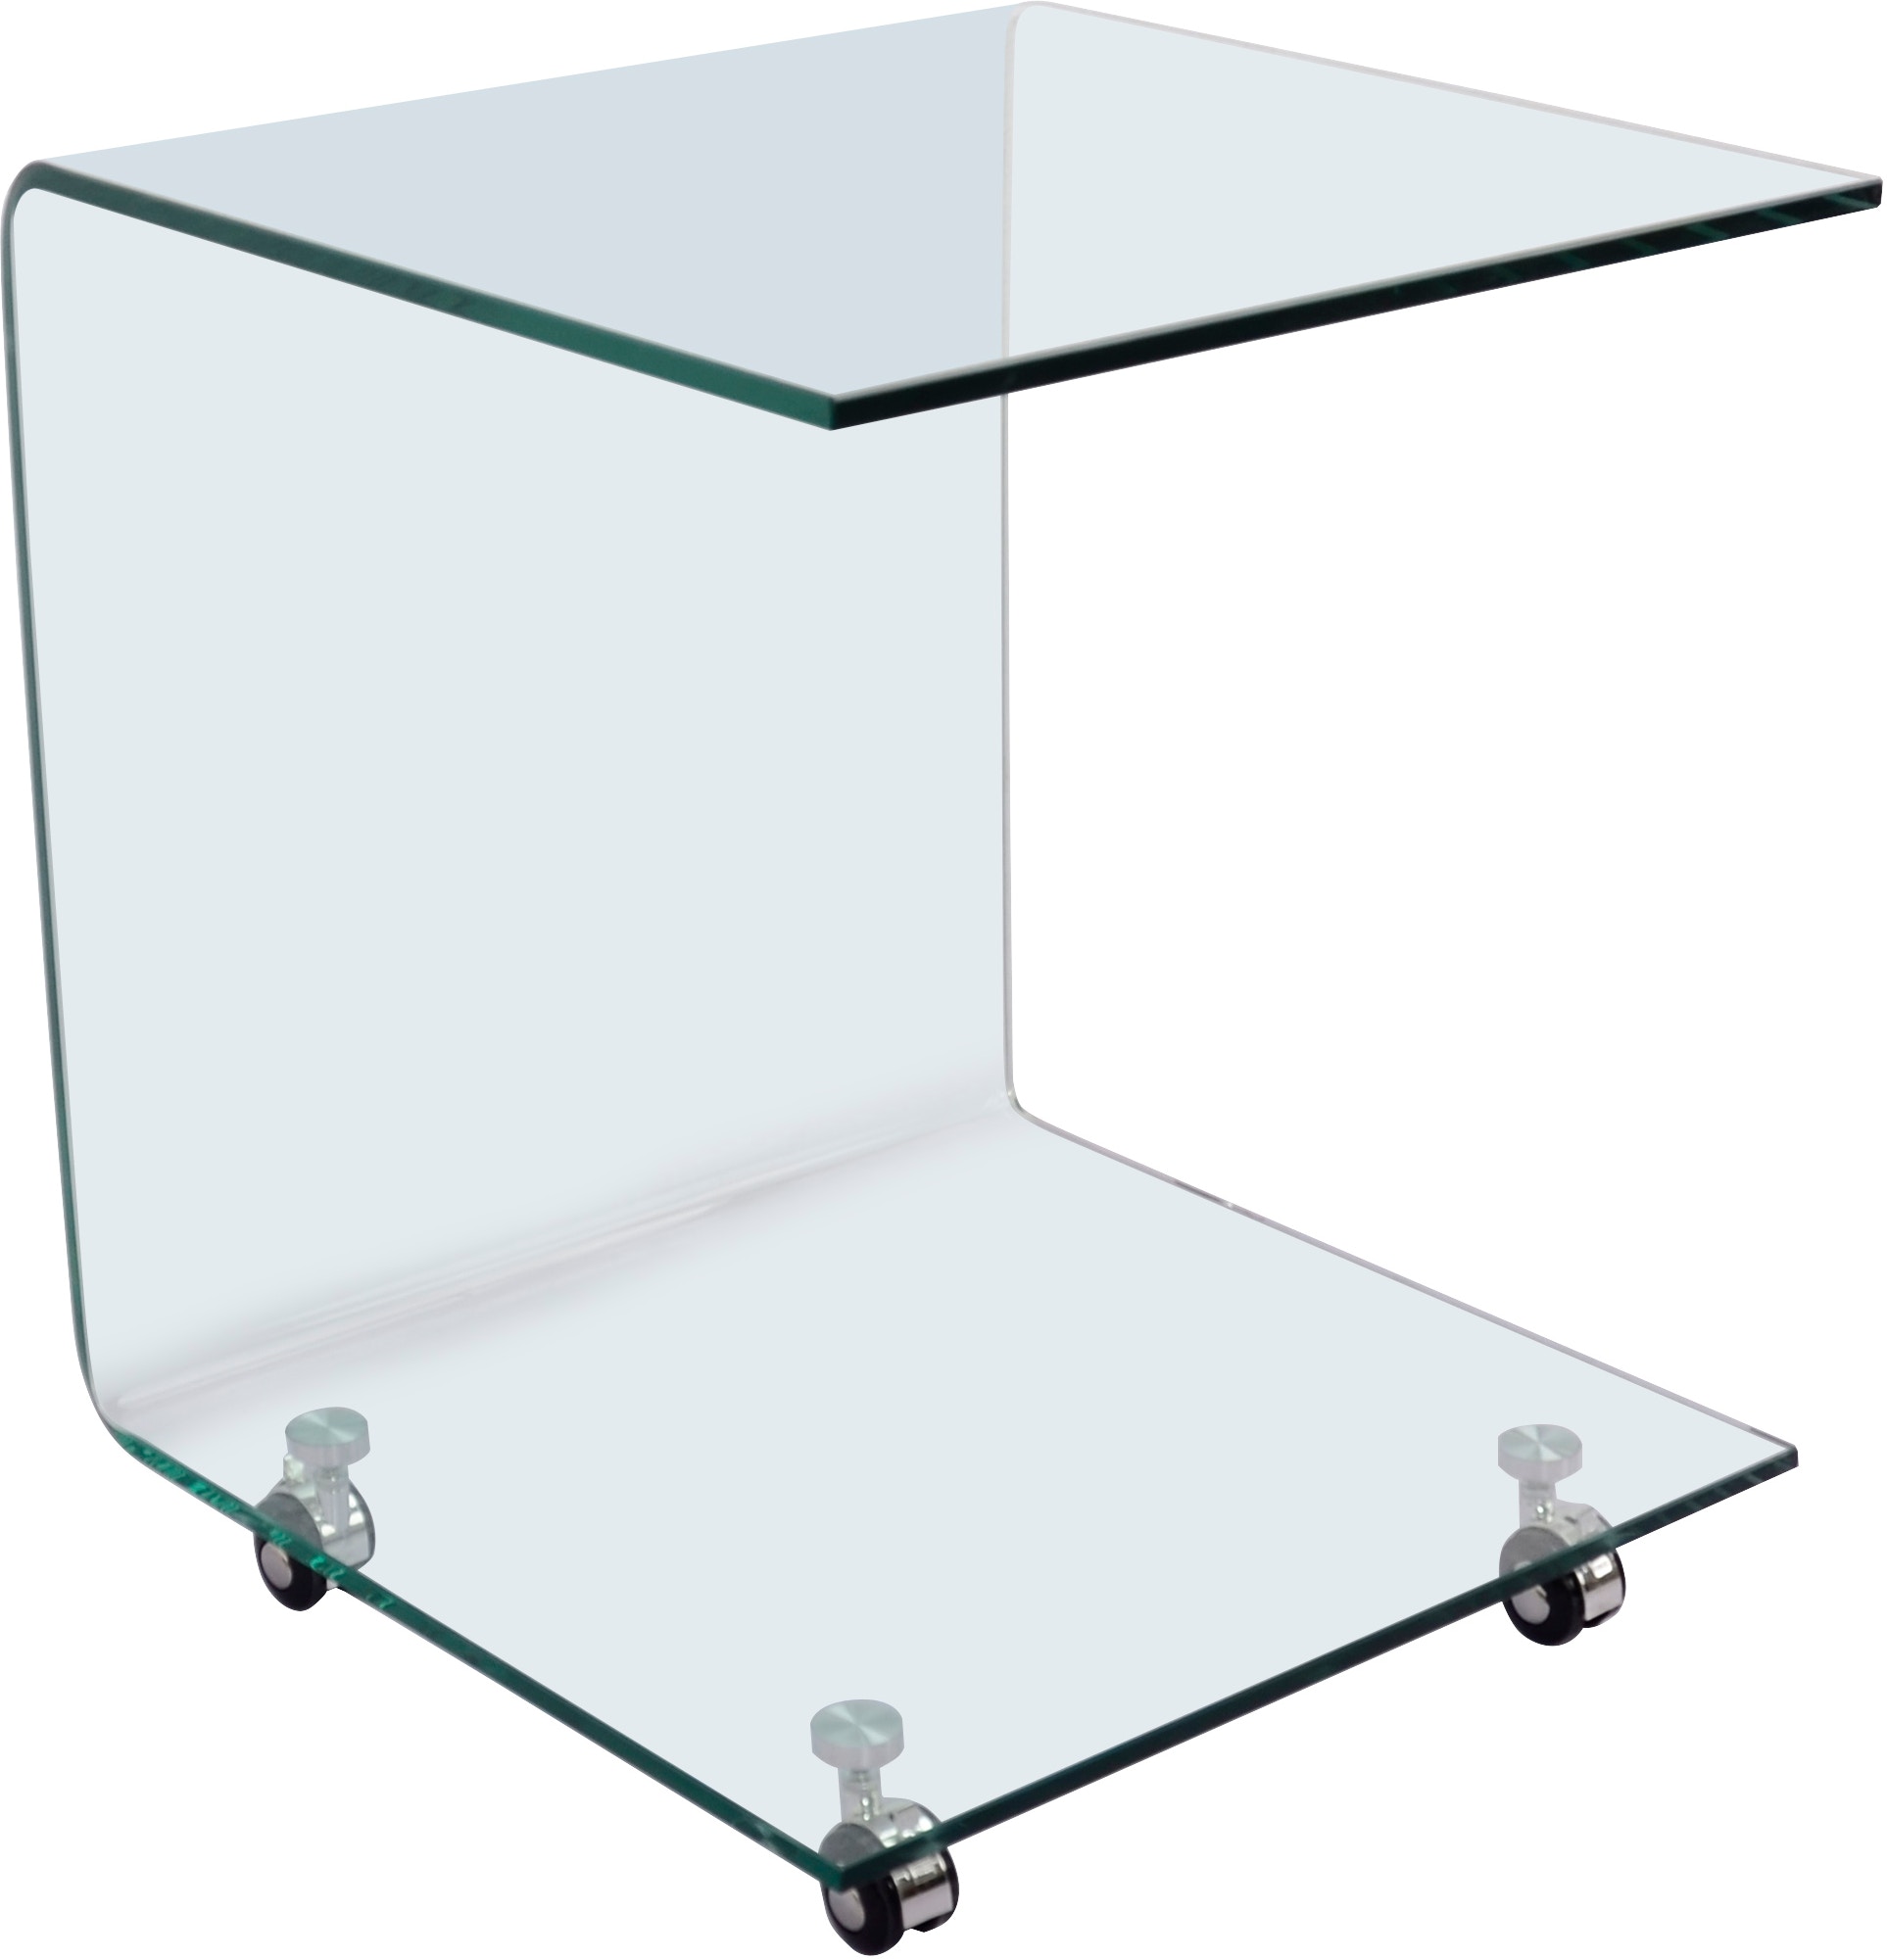 Coaster - Accent Table - 935866